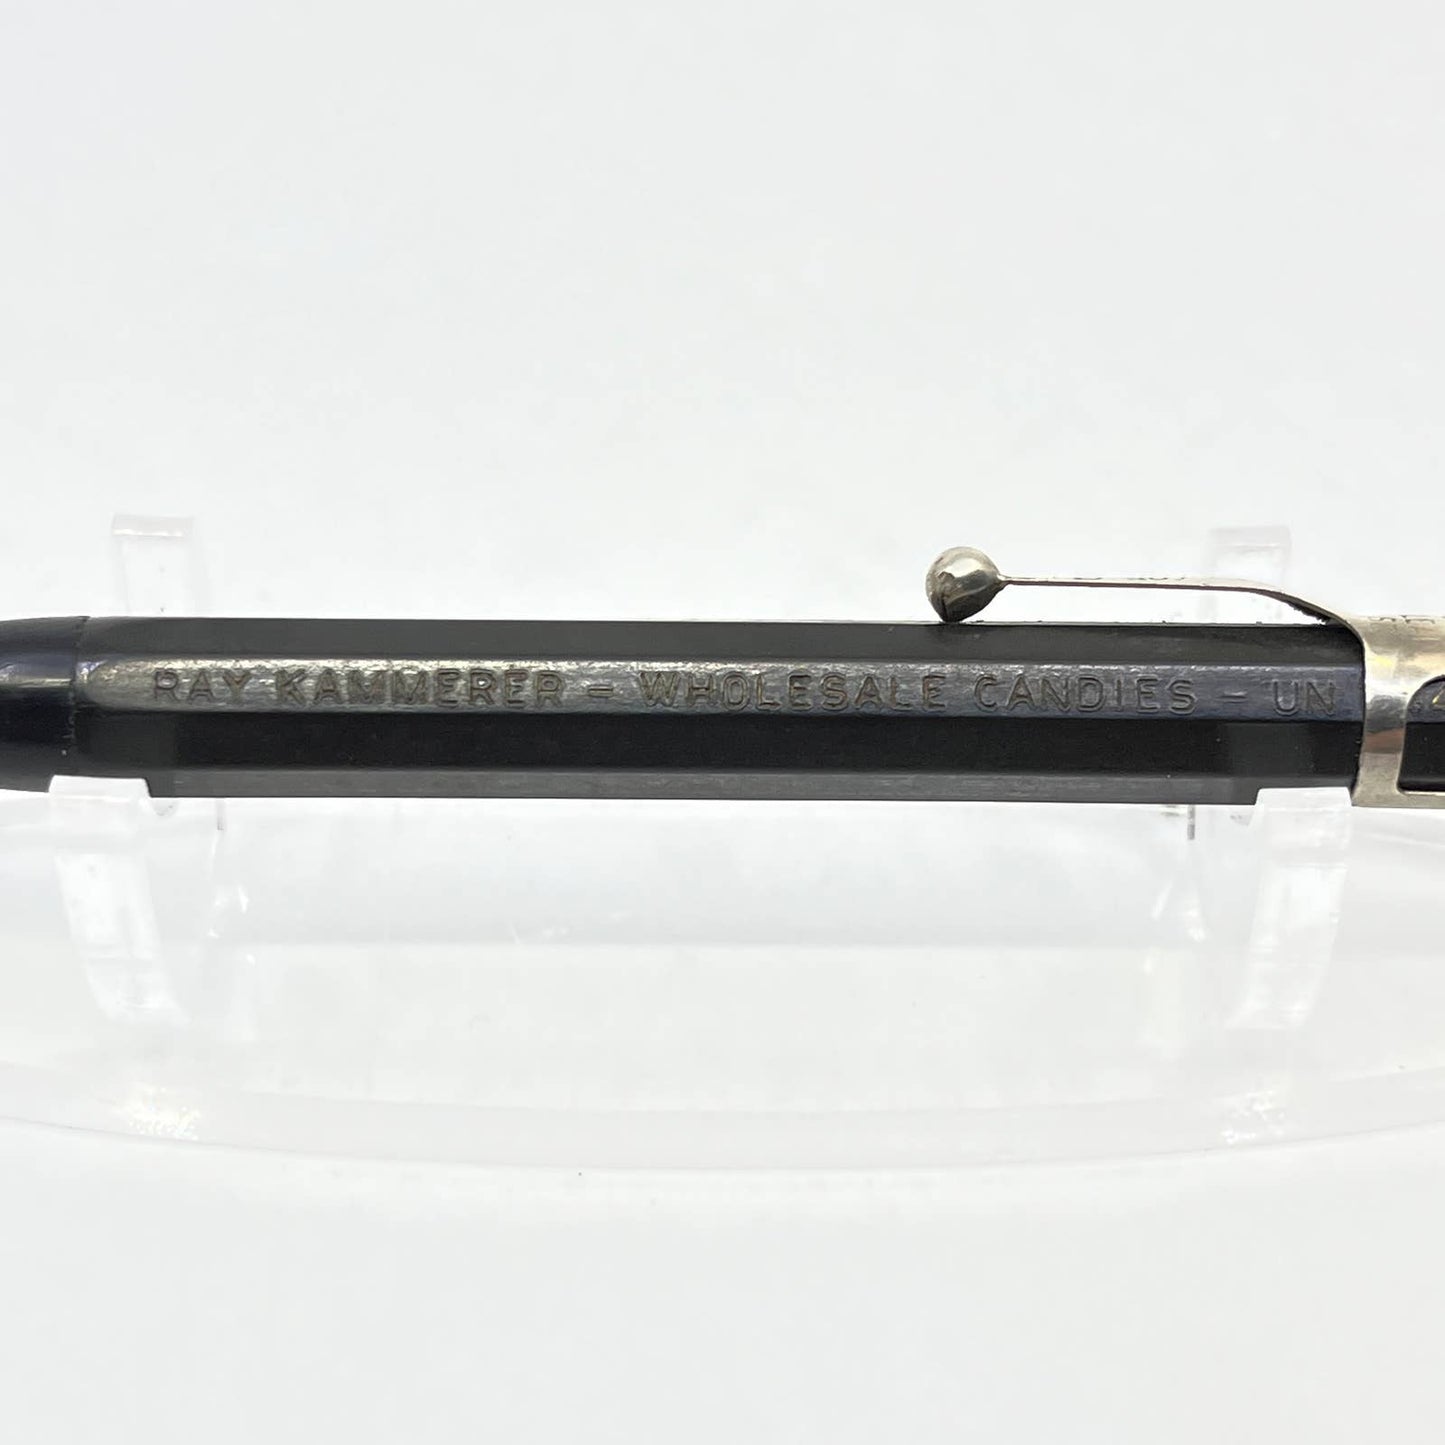 Vintage Mechanical Pencil Ray Kammerer Wholesale Candies SD7